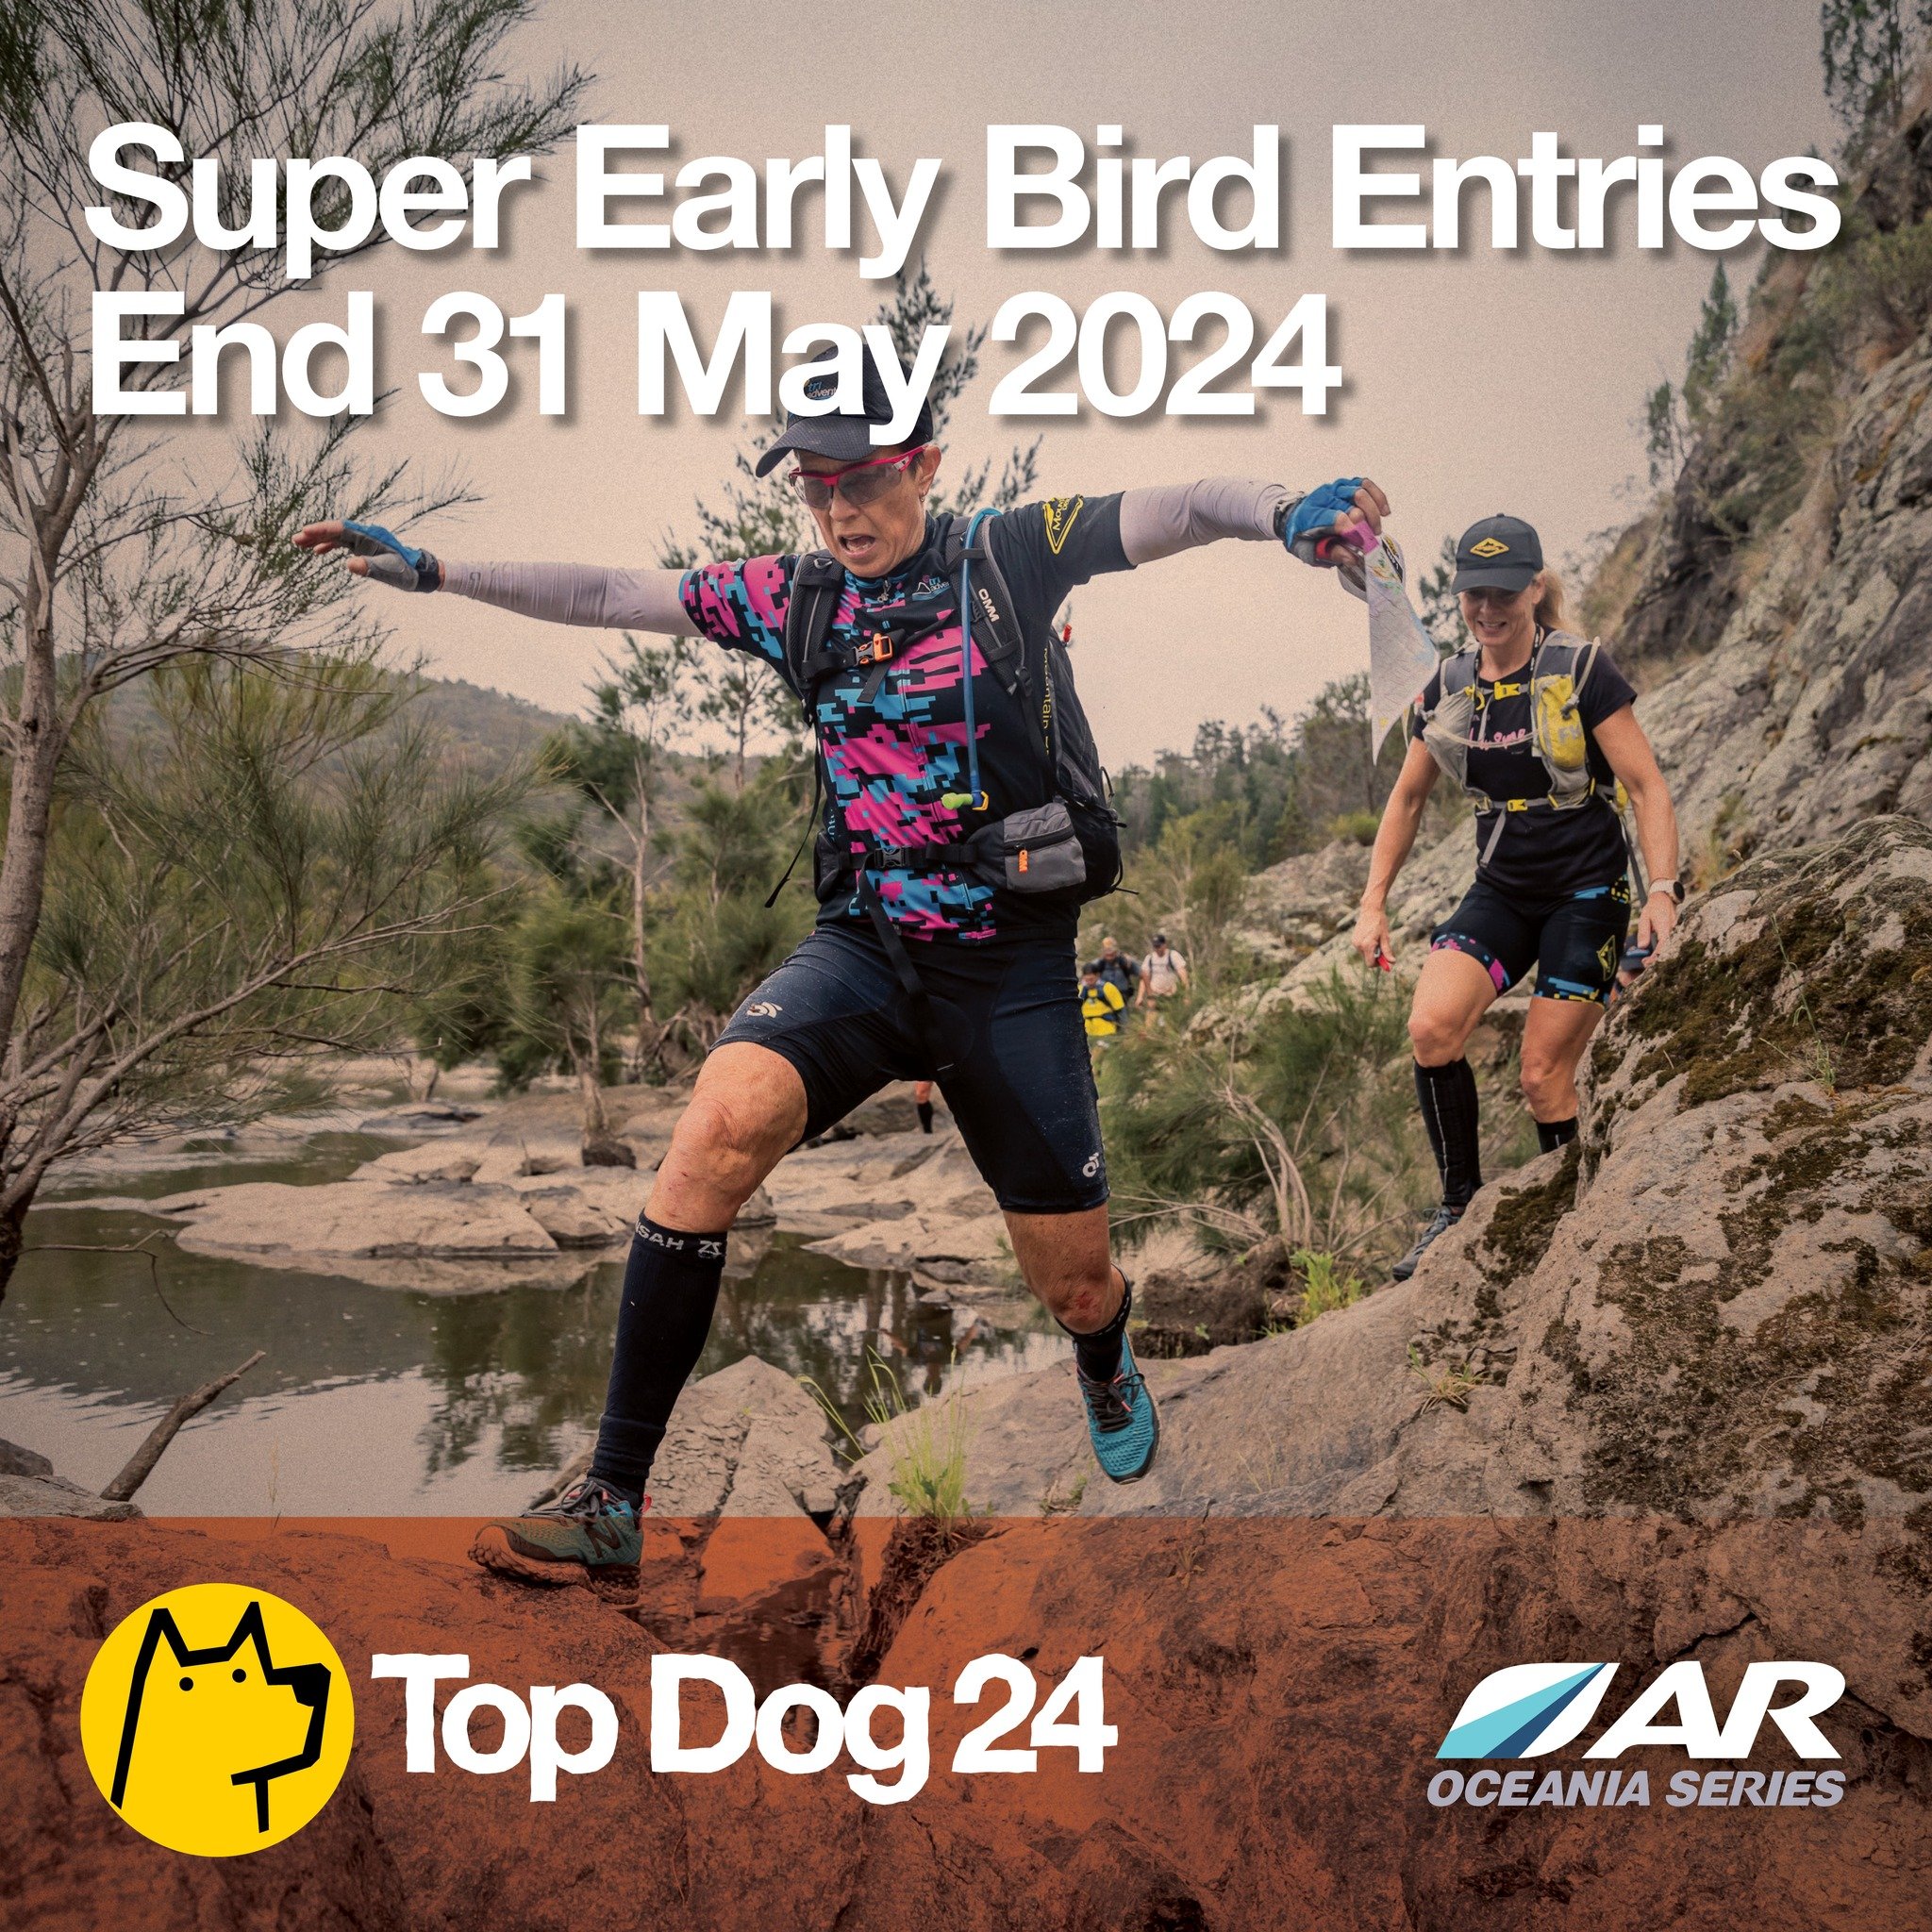 Top Dog Super Early Bird Entries End Midnight 31 May 2024

24hr Adventure Racing is kicking into gear in Australia and we're excited to announce that Top Dog 24 is back on for 2024!

The 2023 event was a great taster for what 24hr adventure racing ca